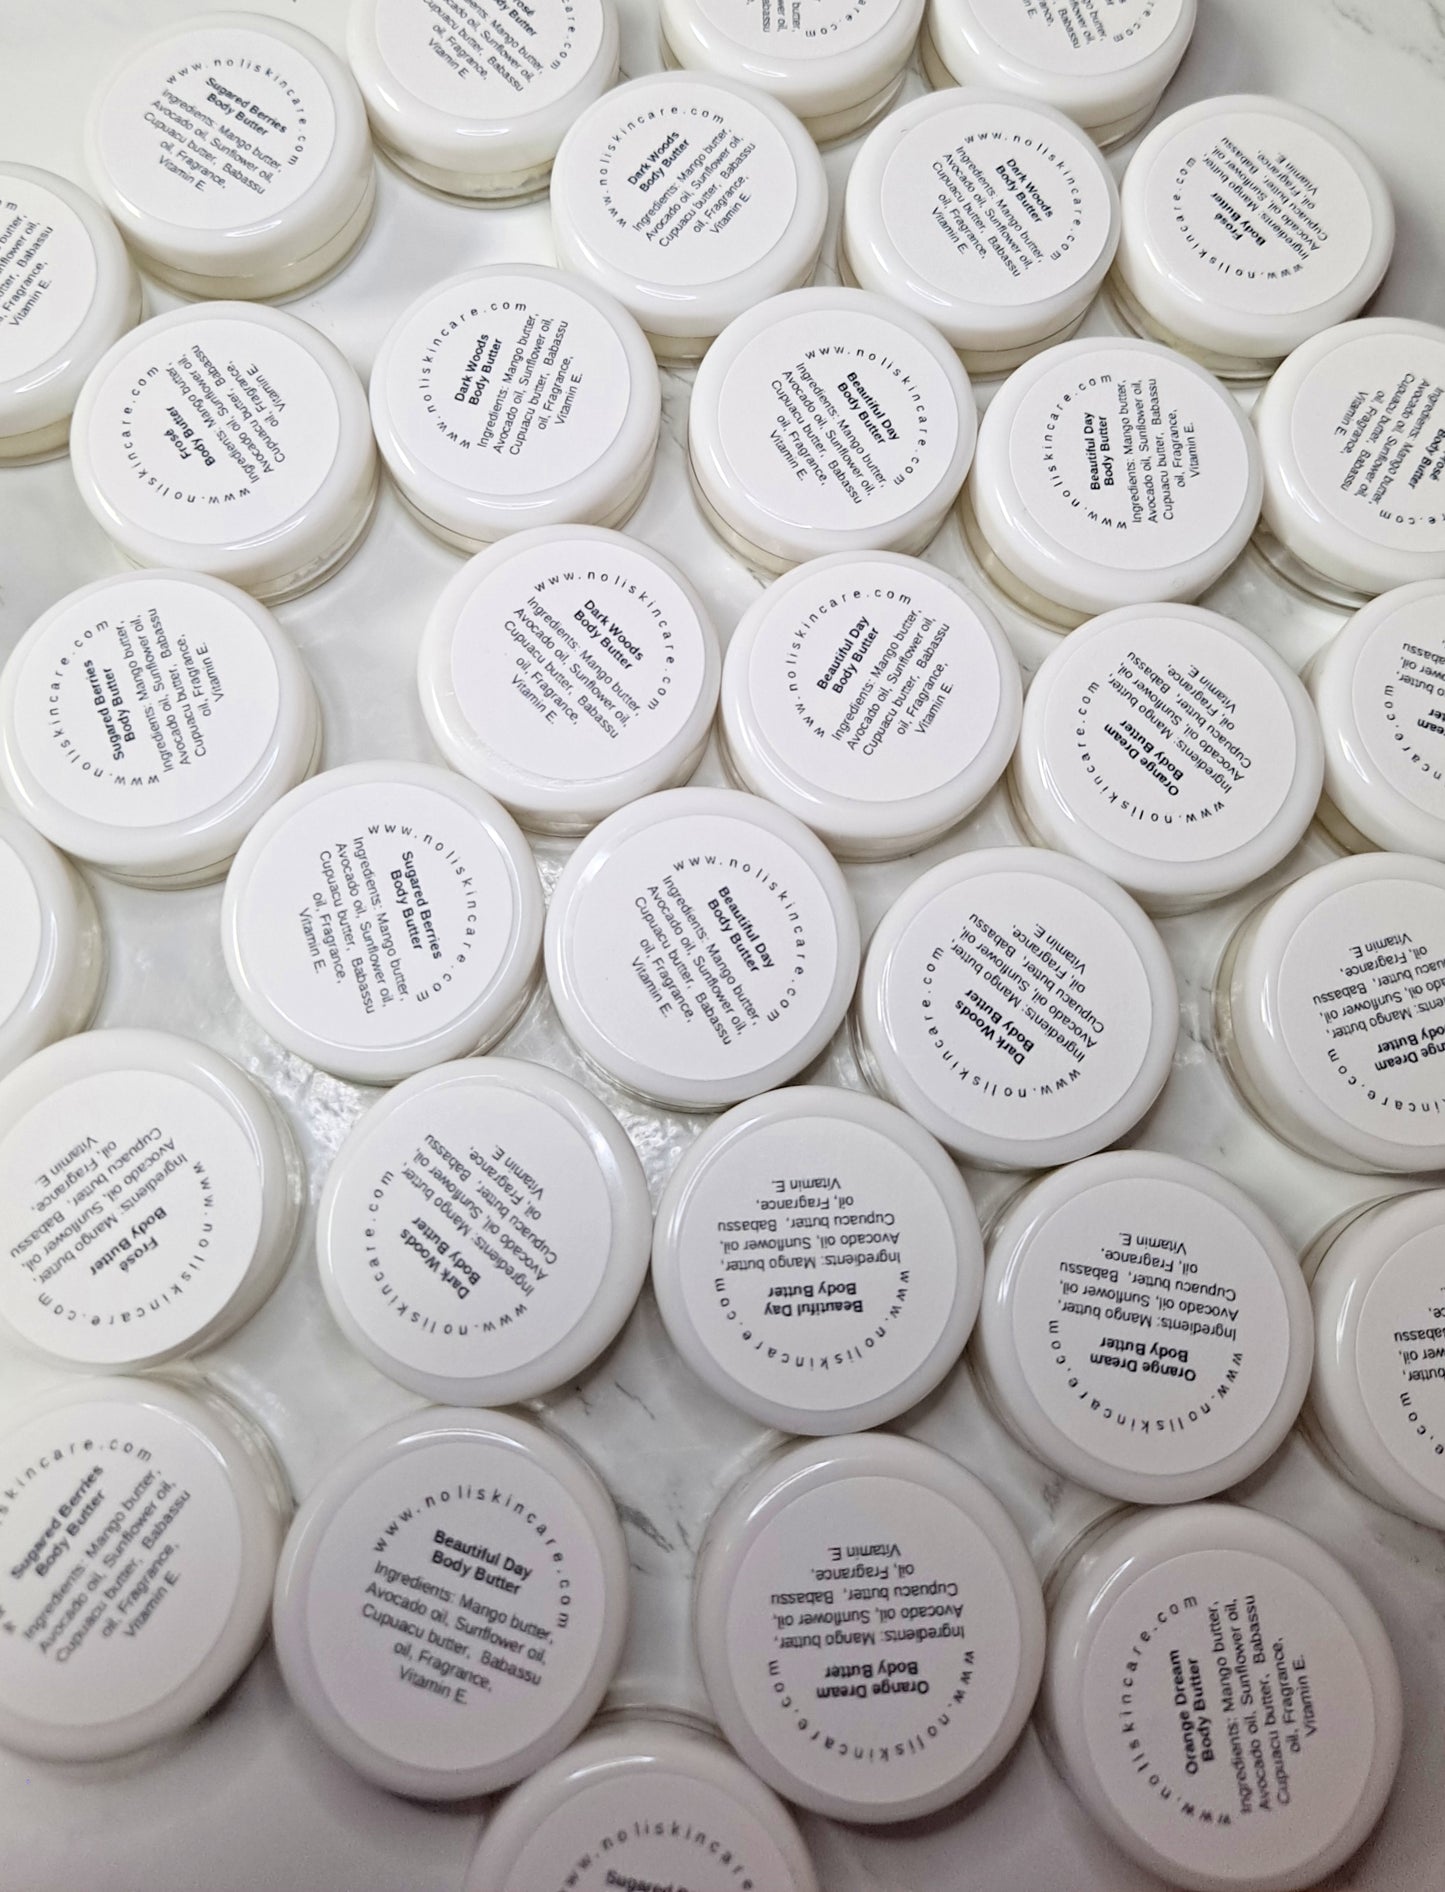 Body butter samples perfect for gifts, wedding favors, birthday favors, sensitive skin and eczema